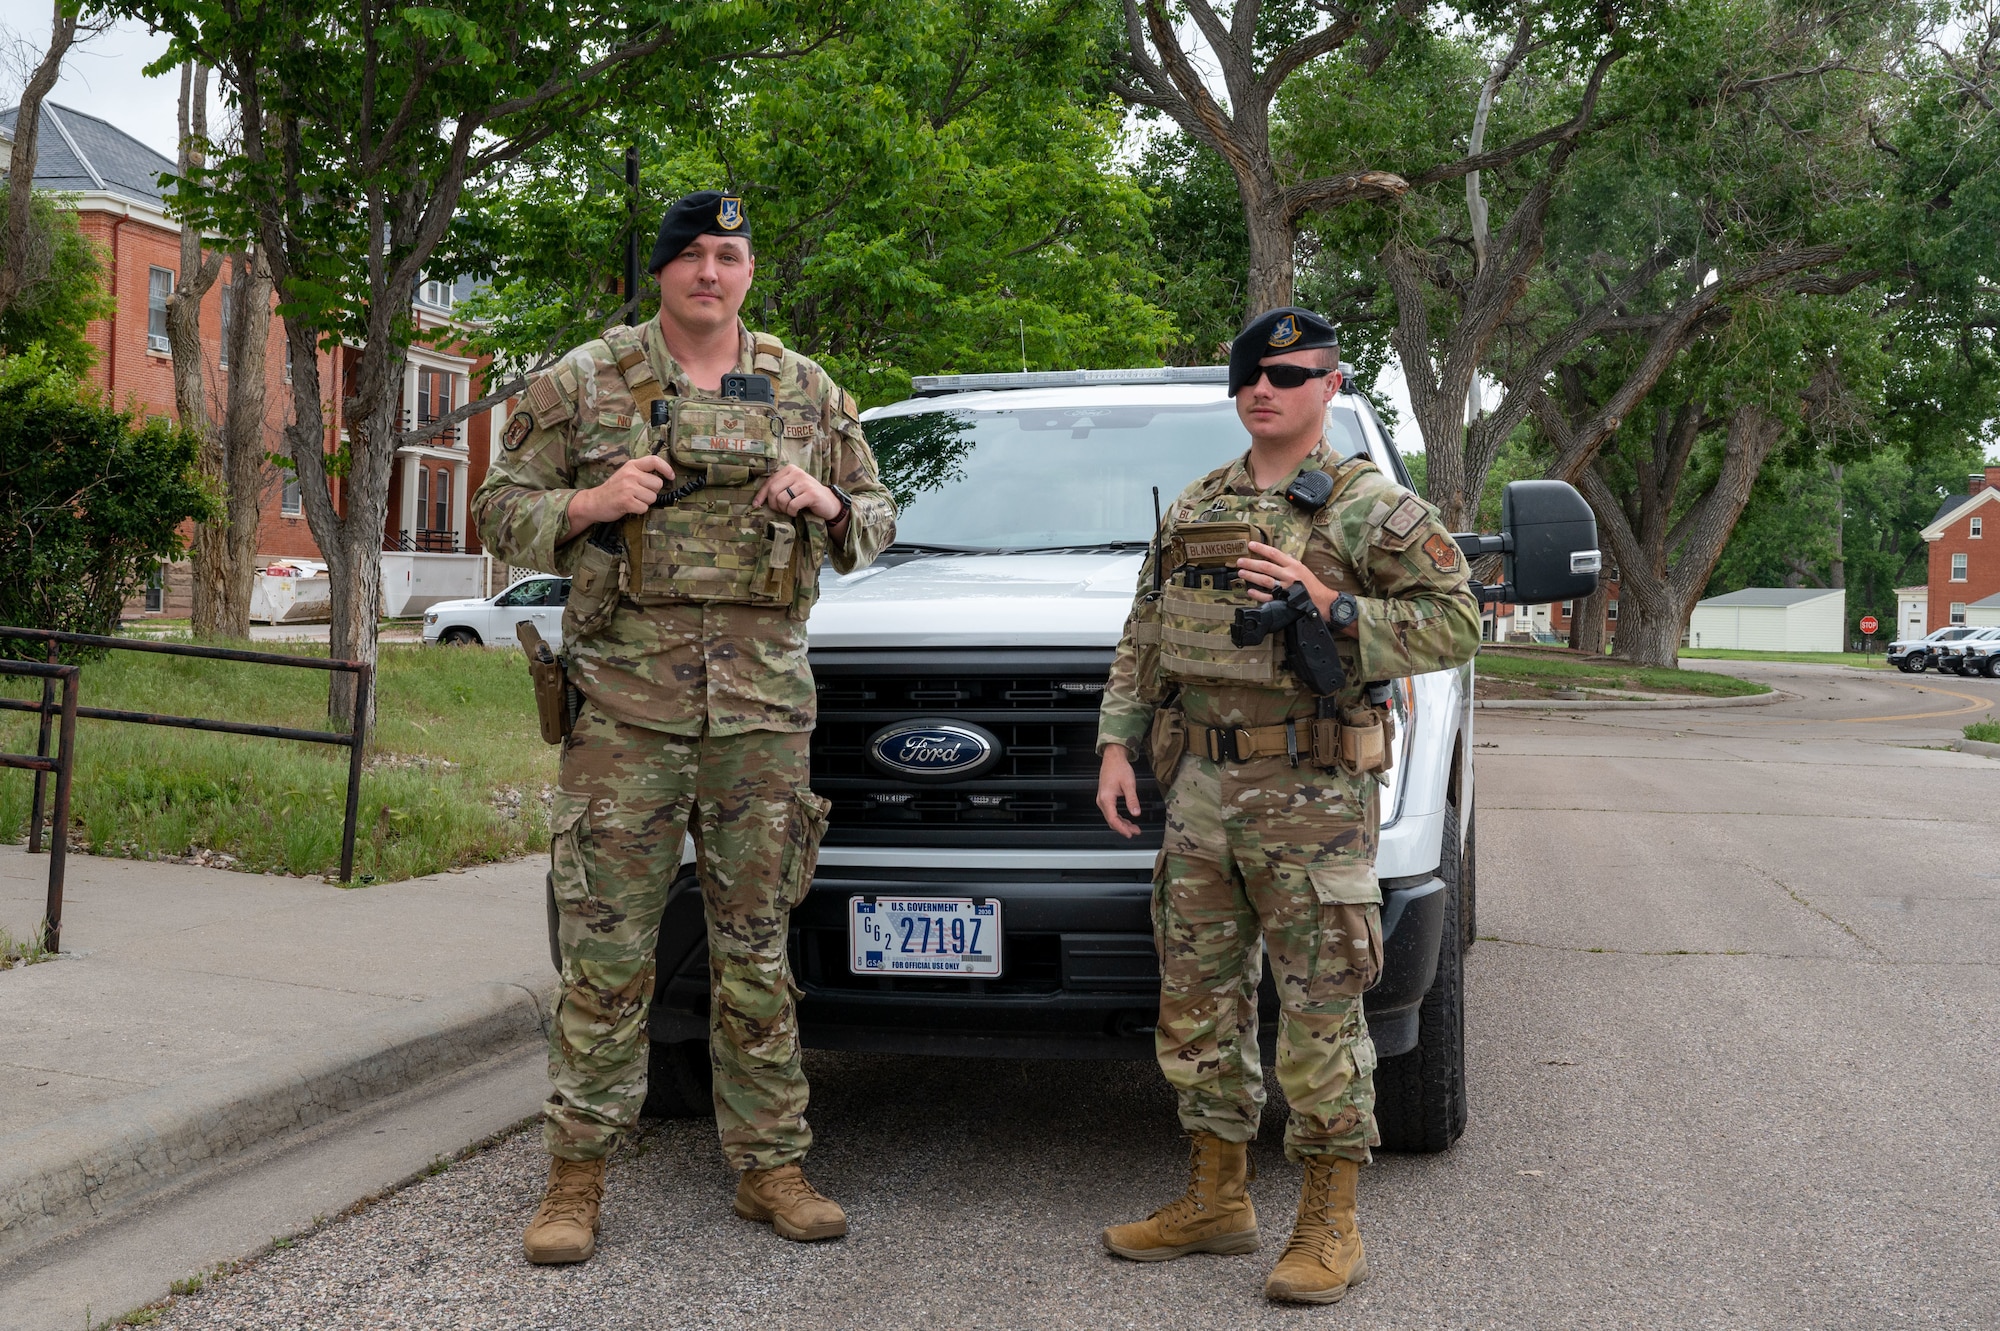 Airmen pose in front of squad car